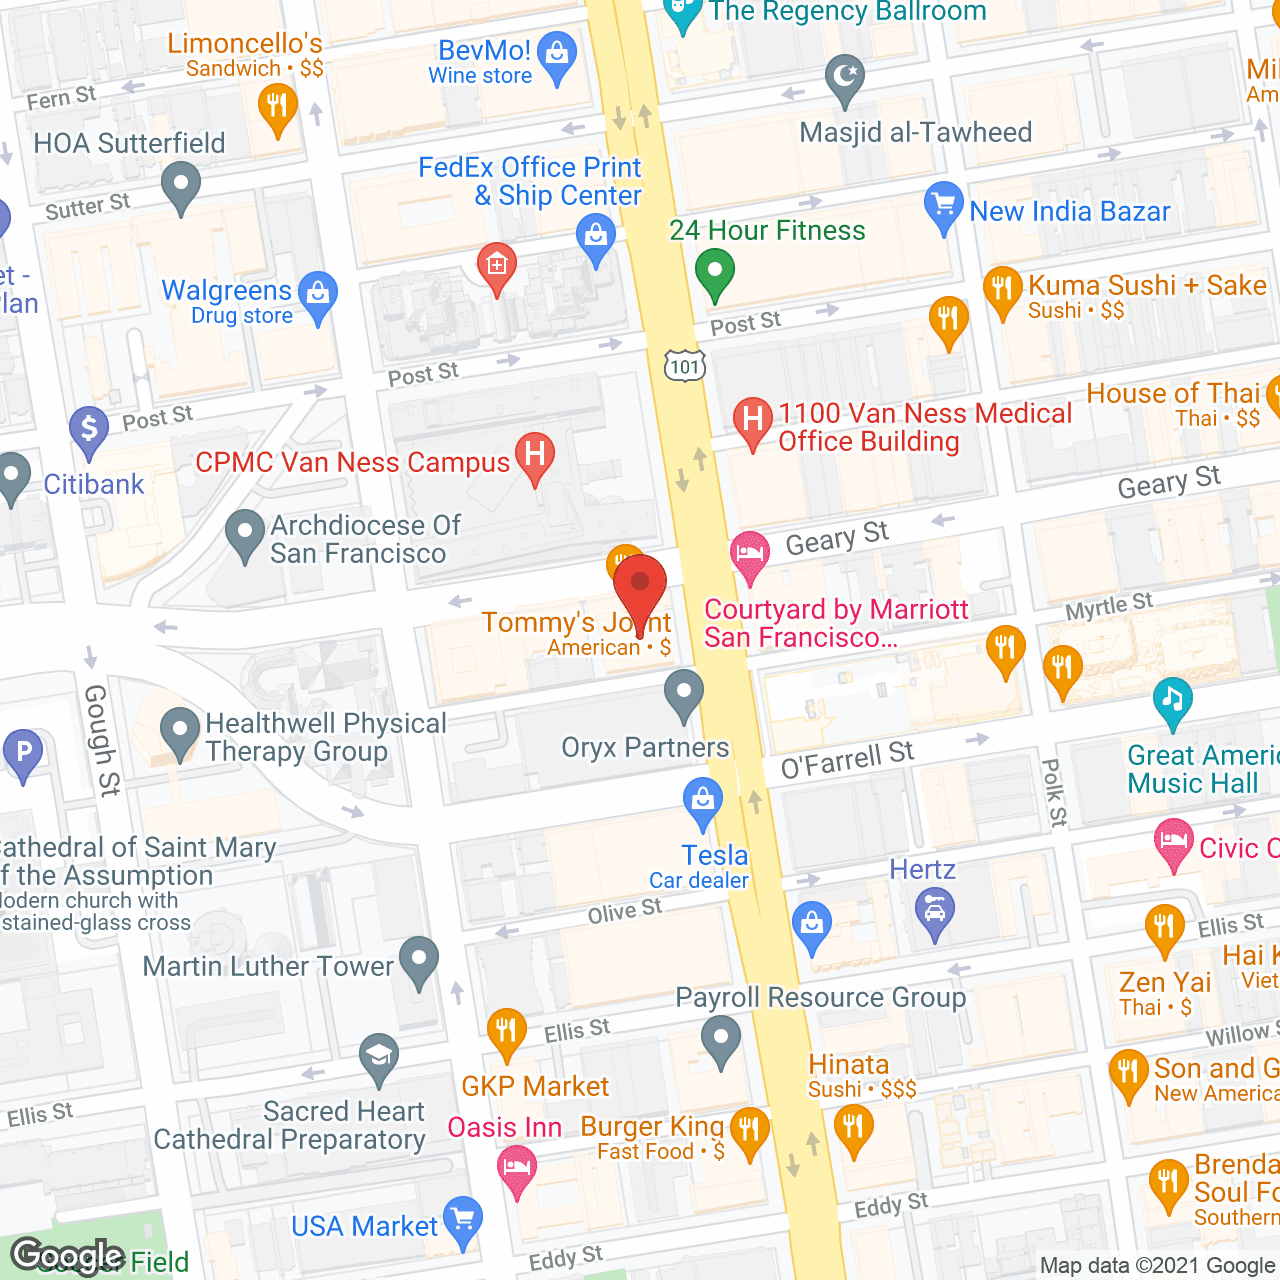 The Avenue in google map